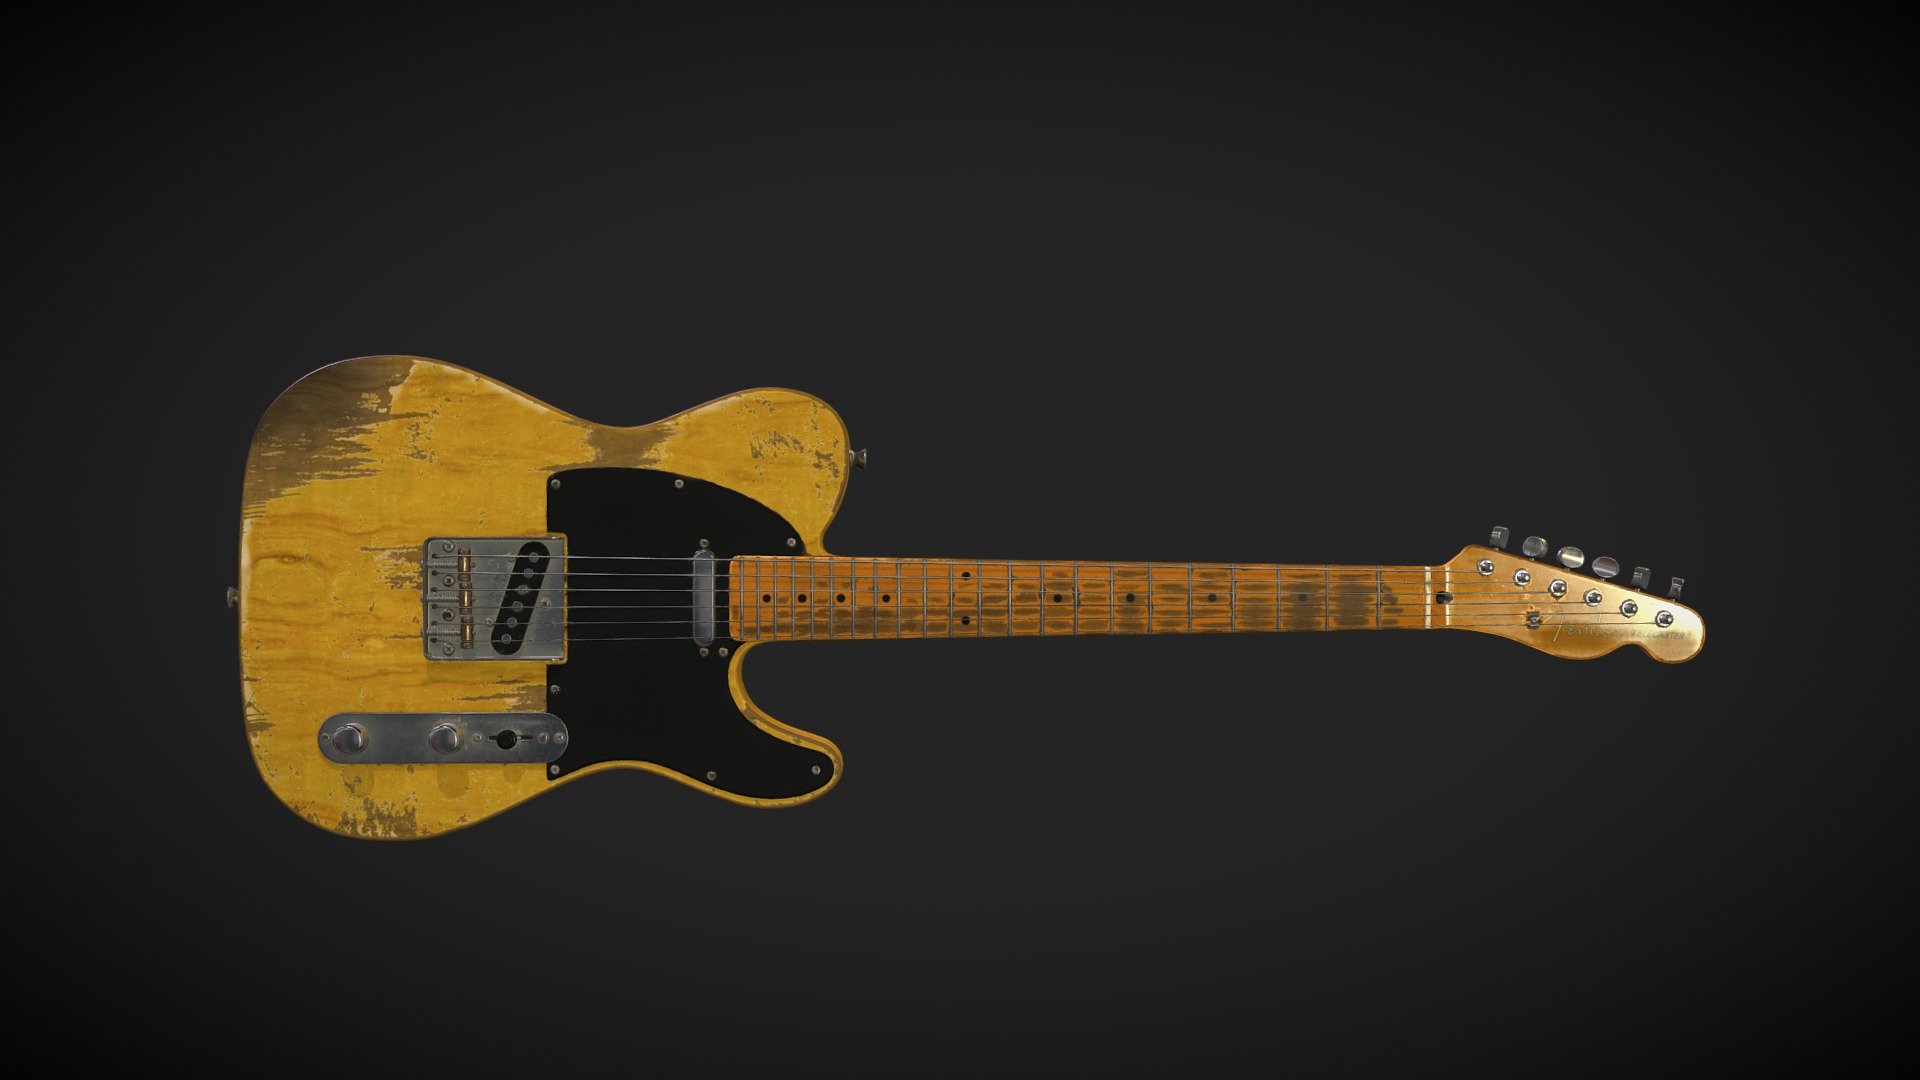 I took one of my guitar models and through texturing, I wanted to narrate its story – how it was crafted at the Fender factory in the 60s, its owner playing extensively in bars, being less than gentle with it, while wearing clothing adorned with metal studs, yet remaining a true virtuoso.

Software used -  Maya and Substance Painter. 

Textures are available in 4K, and upon request, I can provide an uncompressed texture set in 8K and Maya scene - Relic Fender Telecaster - Buy Royalty Free 3D model by Eugene Korolev (@eugene.korolev) 3d model